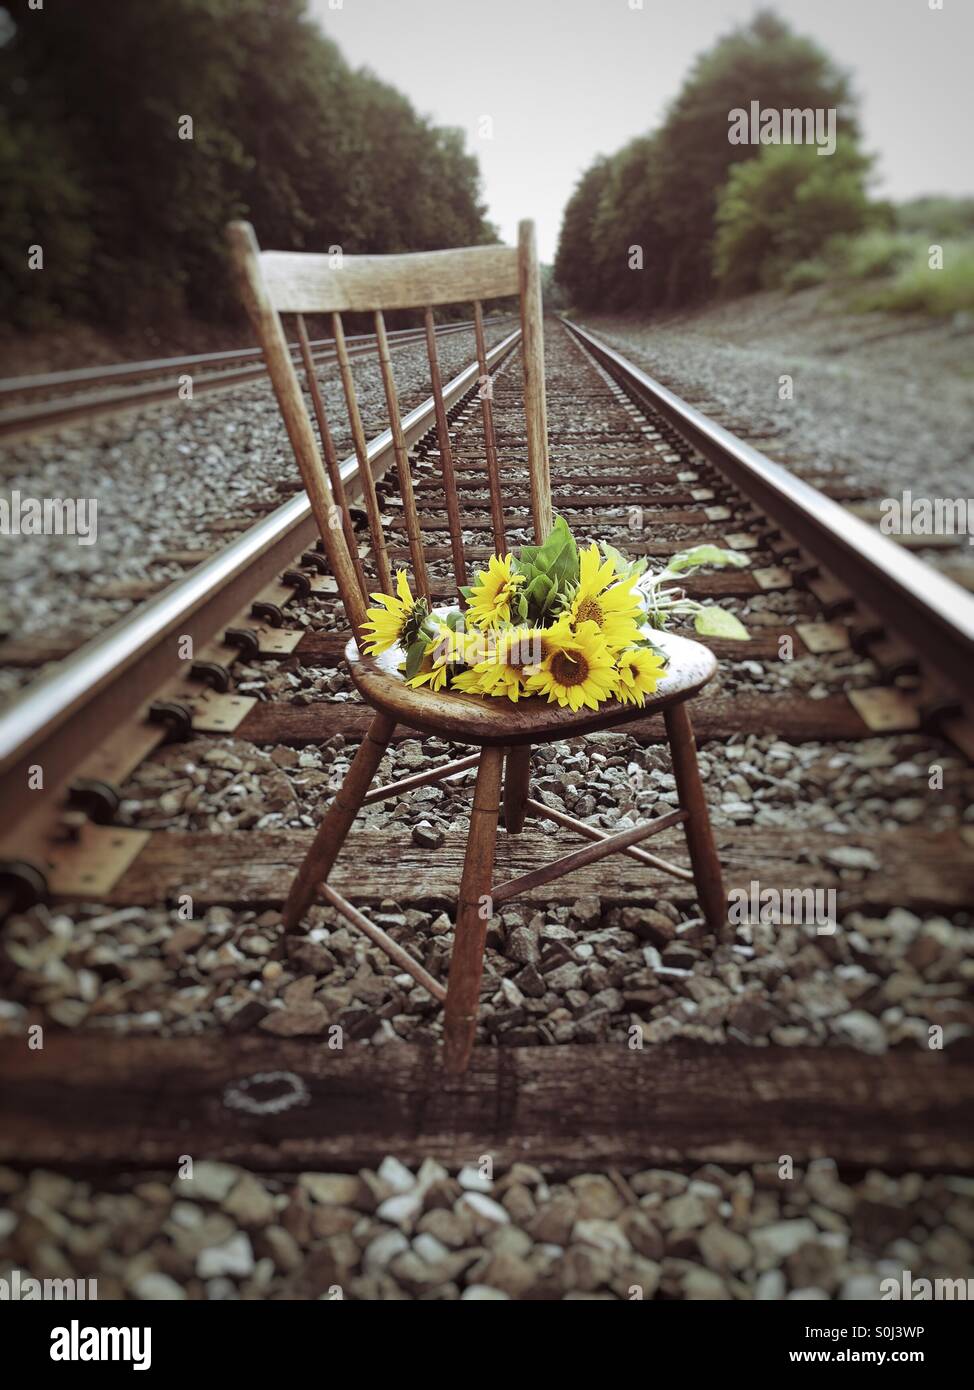 Sunflowers on an antique chair on railroad tracks Stock Photo